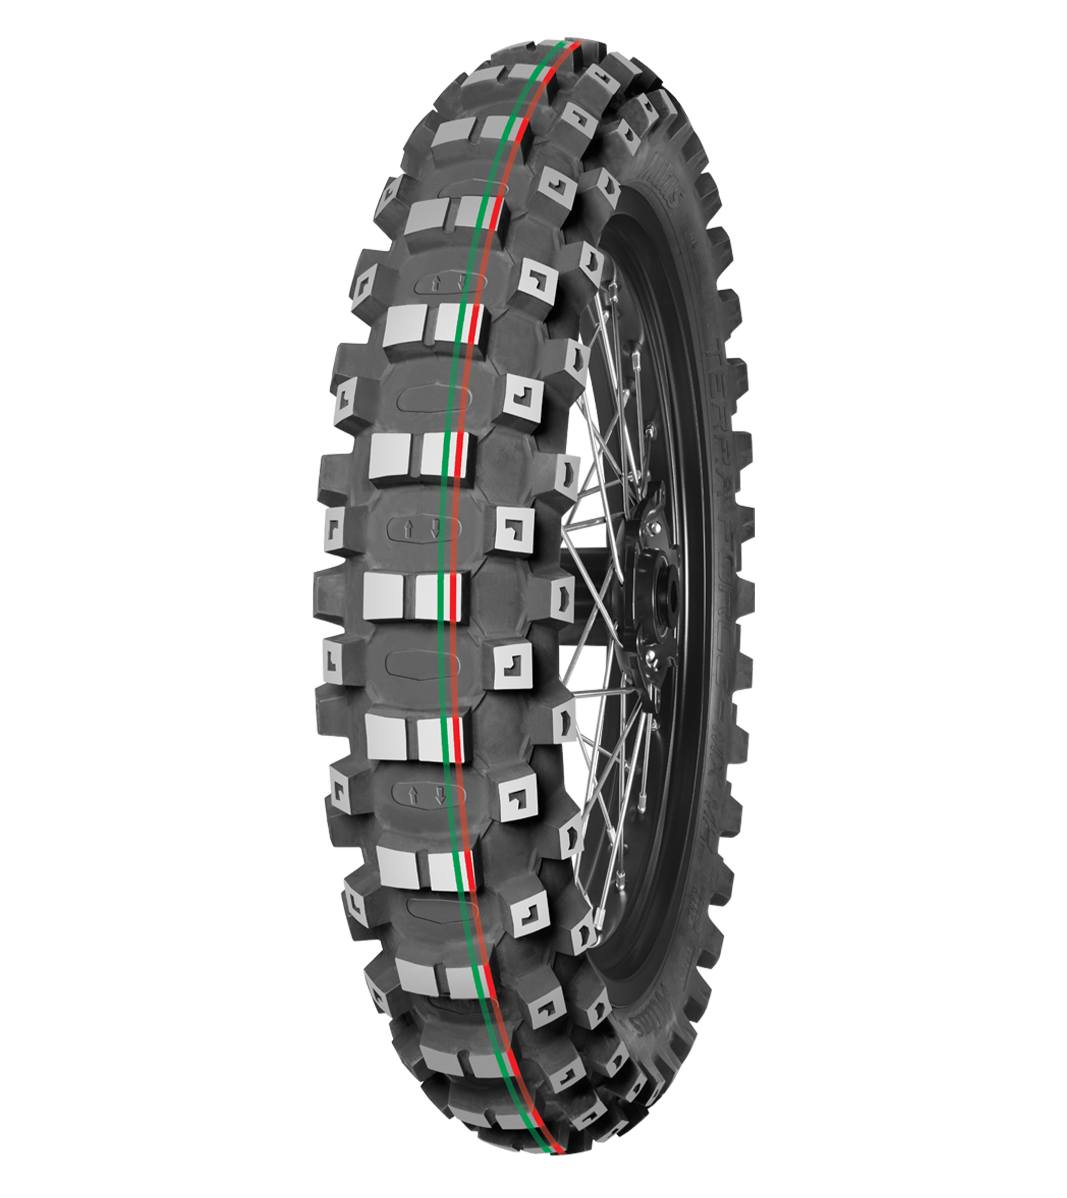 Mitas TERRA FORCE-MX MH 120/80-19 Motocross Competition Off-Road MEDIUM TO HARD 63M Red &amp; Green Tube Rear Tire, 226516, 120/80-19, Motocross, Motocross Competition, Off-Road, Rear, Terra Force, Terra Force-MX MH, Trail, Tires - Imported and distributed in North &amp; South America by Lindeco Genuine Powersports - Premier Powersports Equipment and Accessories for Motorcycle Enthusiasts, Professional Riders and Dealers.